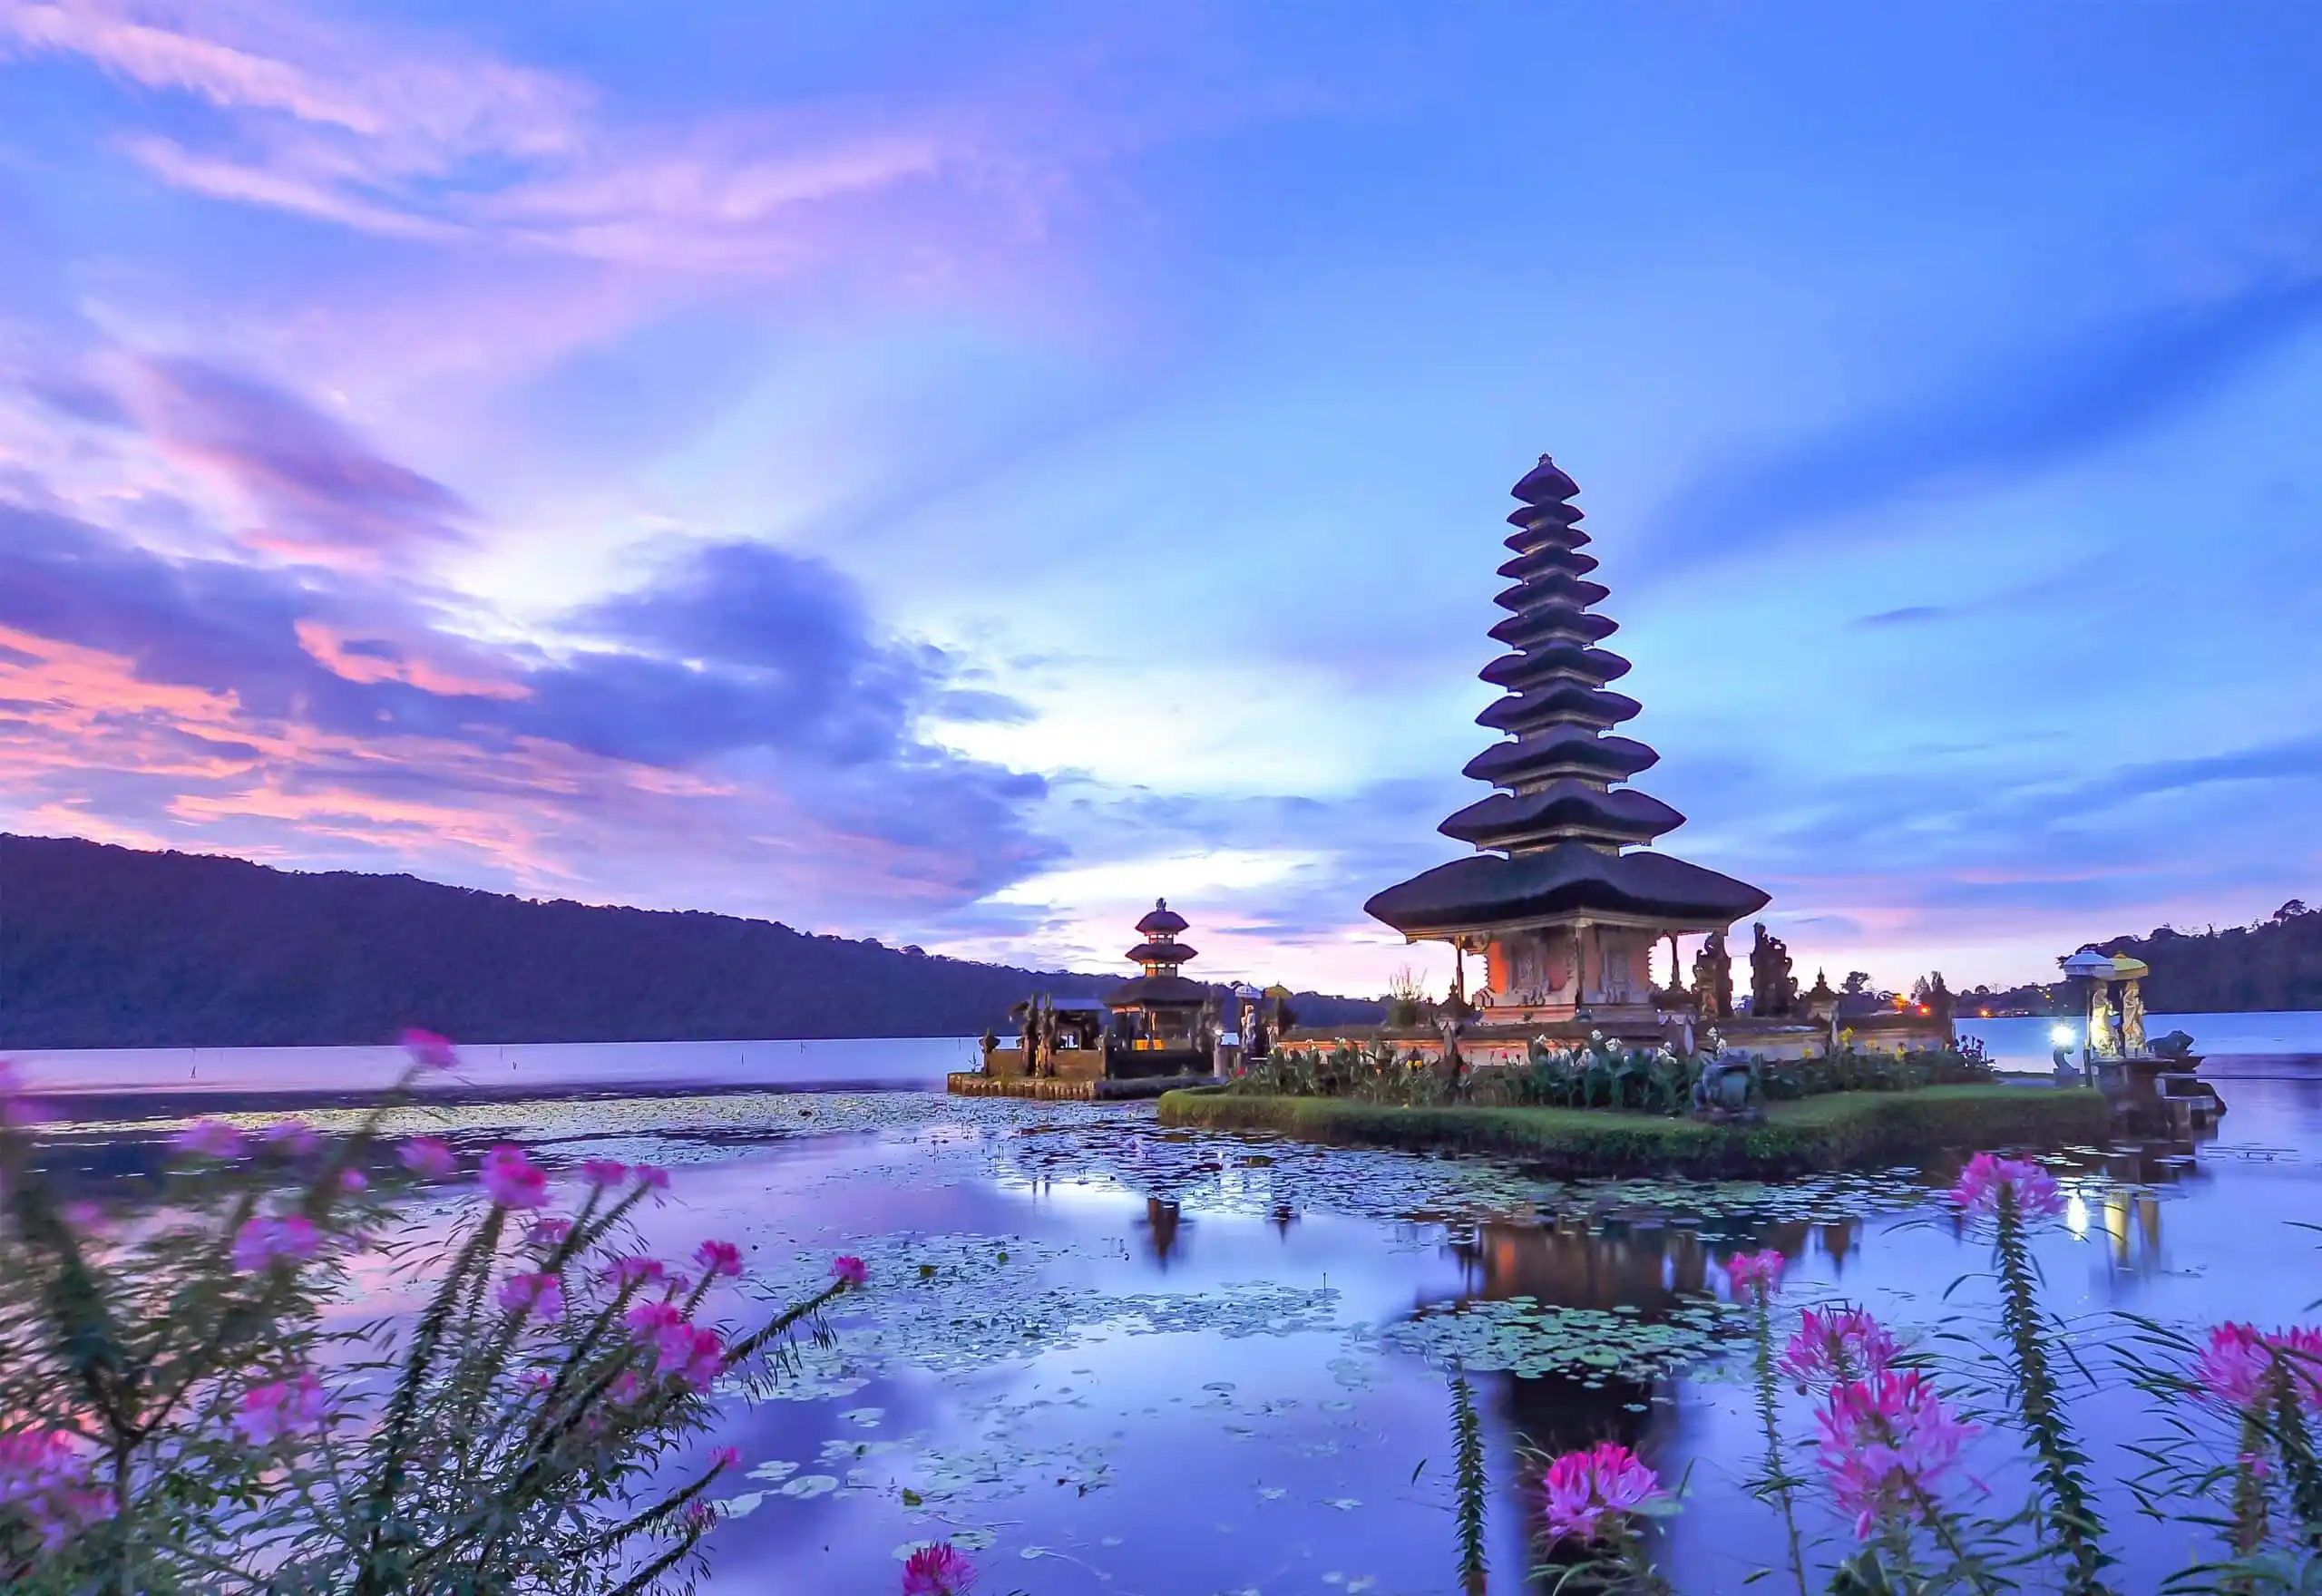 Training Courses in Bali , Indonesia